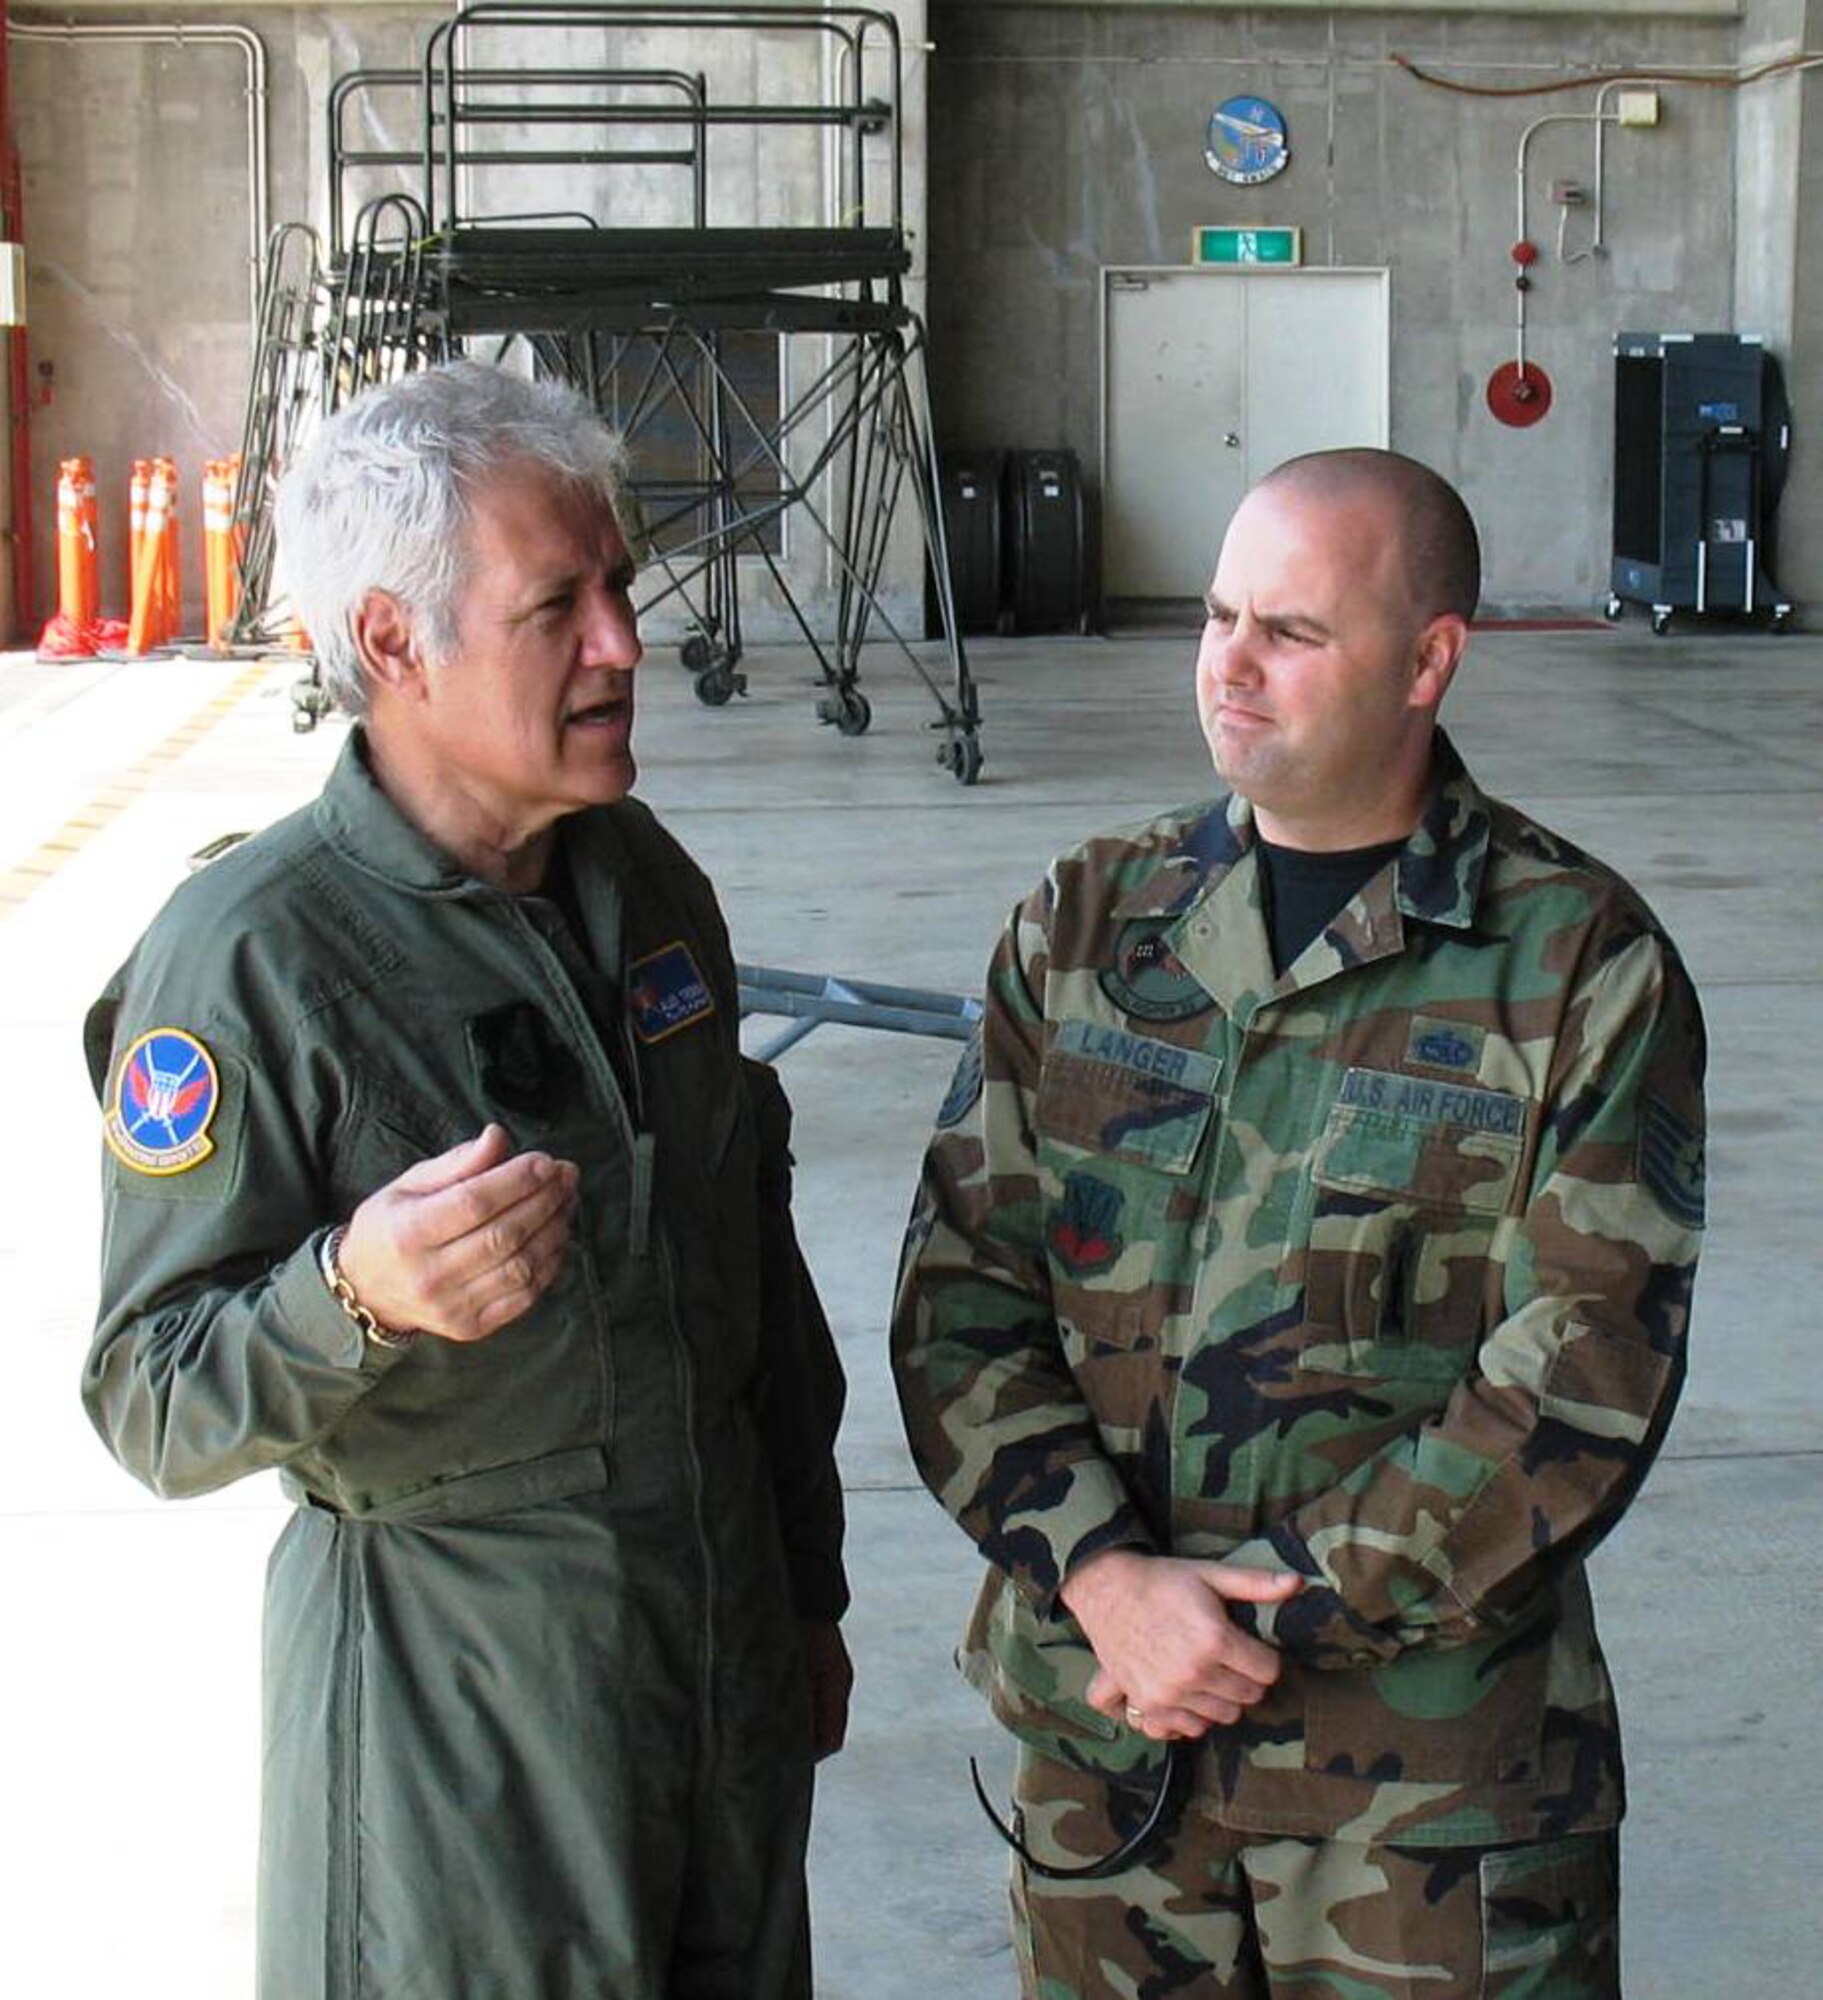 KADENA AIR BASE, Japan -- Alex Trebek, host of the Jeopardy game show, talks with Air Force Tech. Sgt. Mark Langer March 31 during a Jeopardy game show USO tour of Japan.  Sergeant Langer is deployed here with the 27th Fighter Squadron from Langley Air Force, Va., on the F-22 stealth fighter's first overseas deployment. During a two-day trip to Kadena, Mr. Trebek and Jeopardy show staff also toured an F-22, a KC-135 stratotanker, an E-3 AWACS (Airborne Warning and Control System), an F-15C fighter, and an HH-60 helicopter.  The F-22 is temporarily based at Kadena on its first overseas deployment from Langley Air Force Base.  Kadena residents were allowed to try-out to be contestants on Jeopardy, as well.  (Air Force/Senior Master Sgt. Kenneth Fidler)